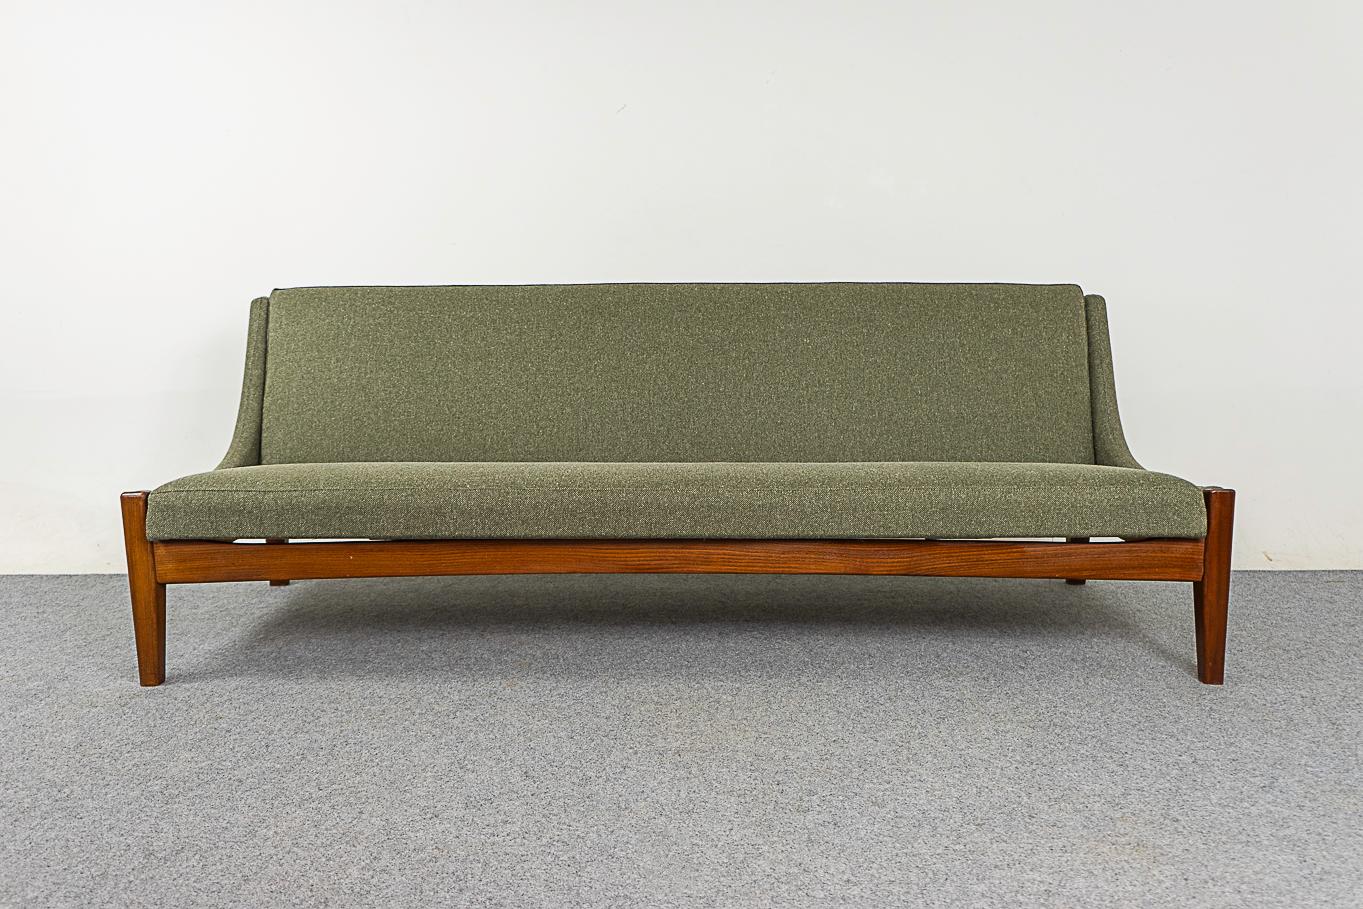 Teak Danish sofa bed, circa 1960's. Solid teak construction, fresh long-lasting foam, new sage green quality silk & wool upholstery, with a lovely feel to it! Transformative design allows it to flattens out into a comfortable bed!

77